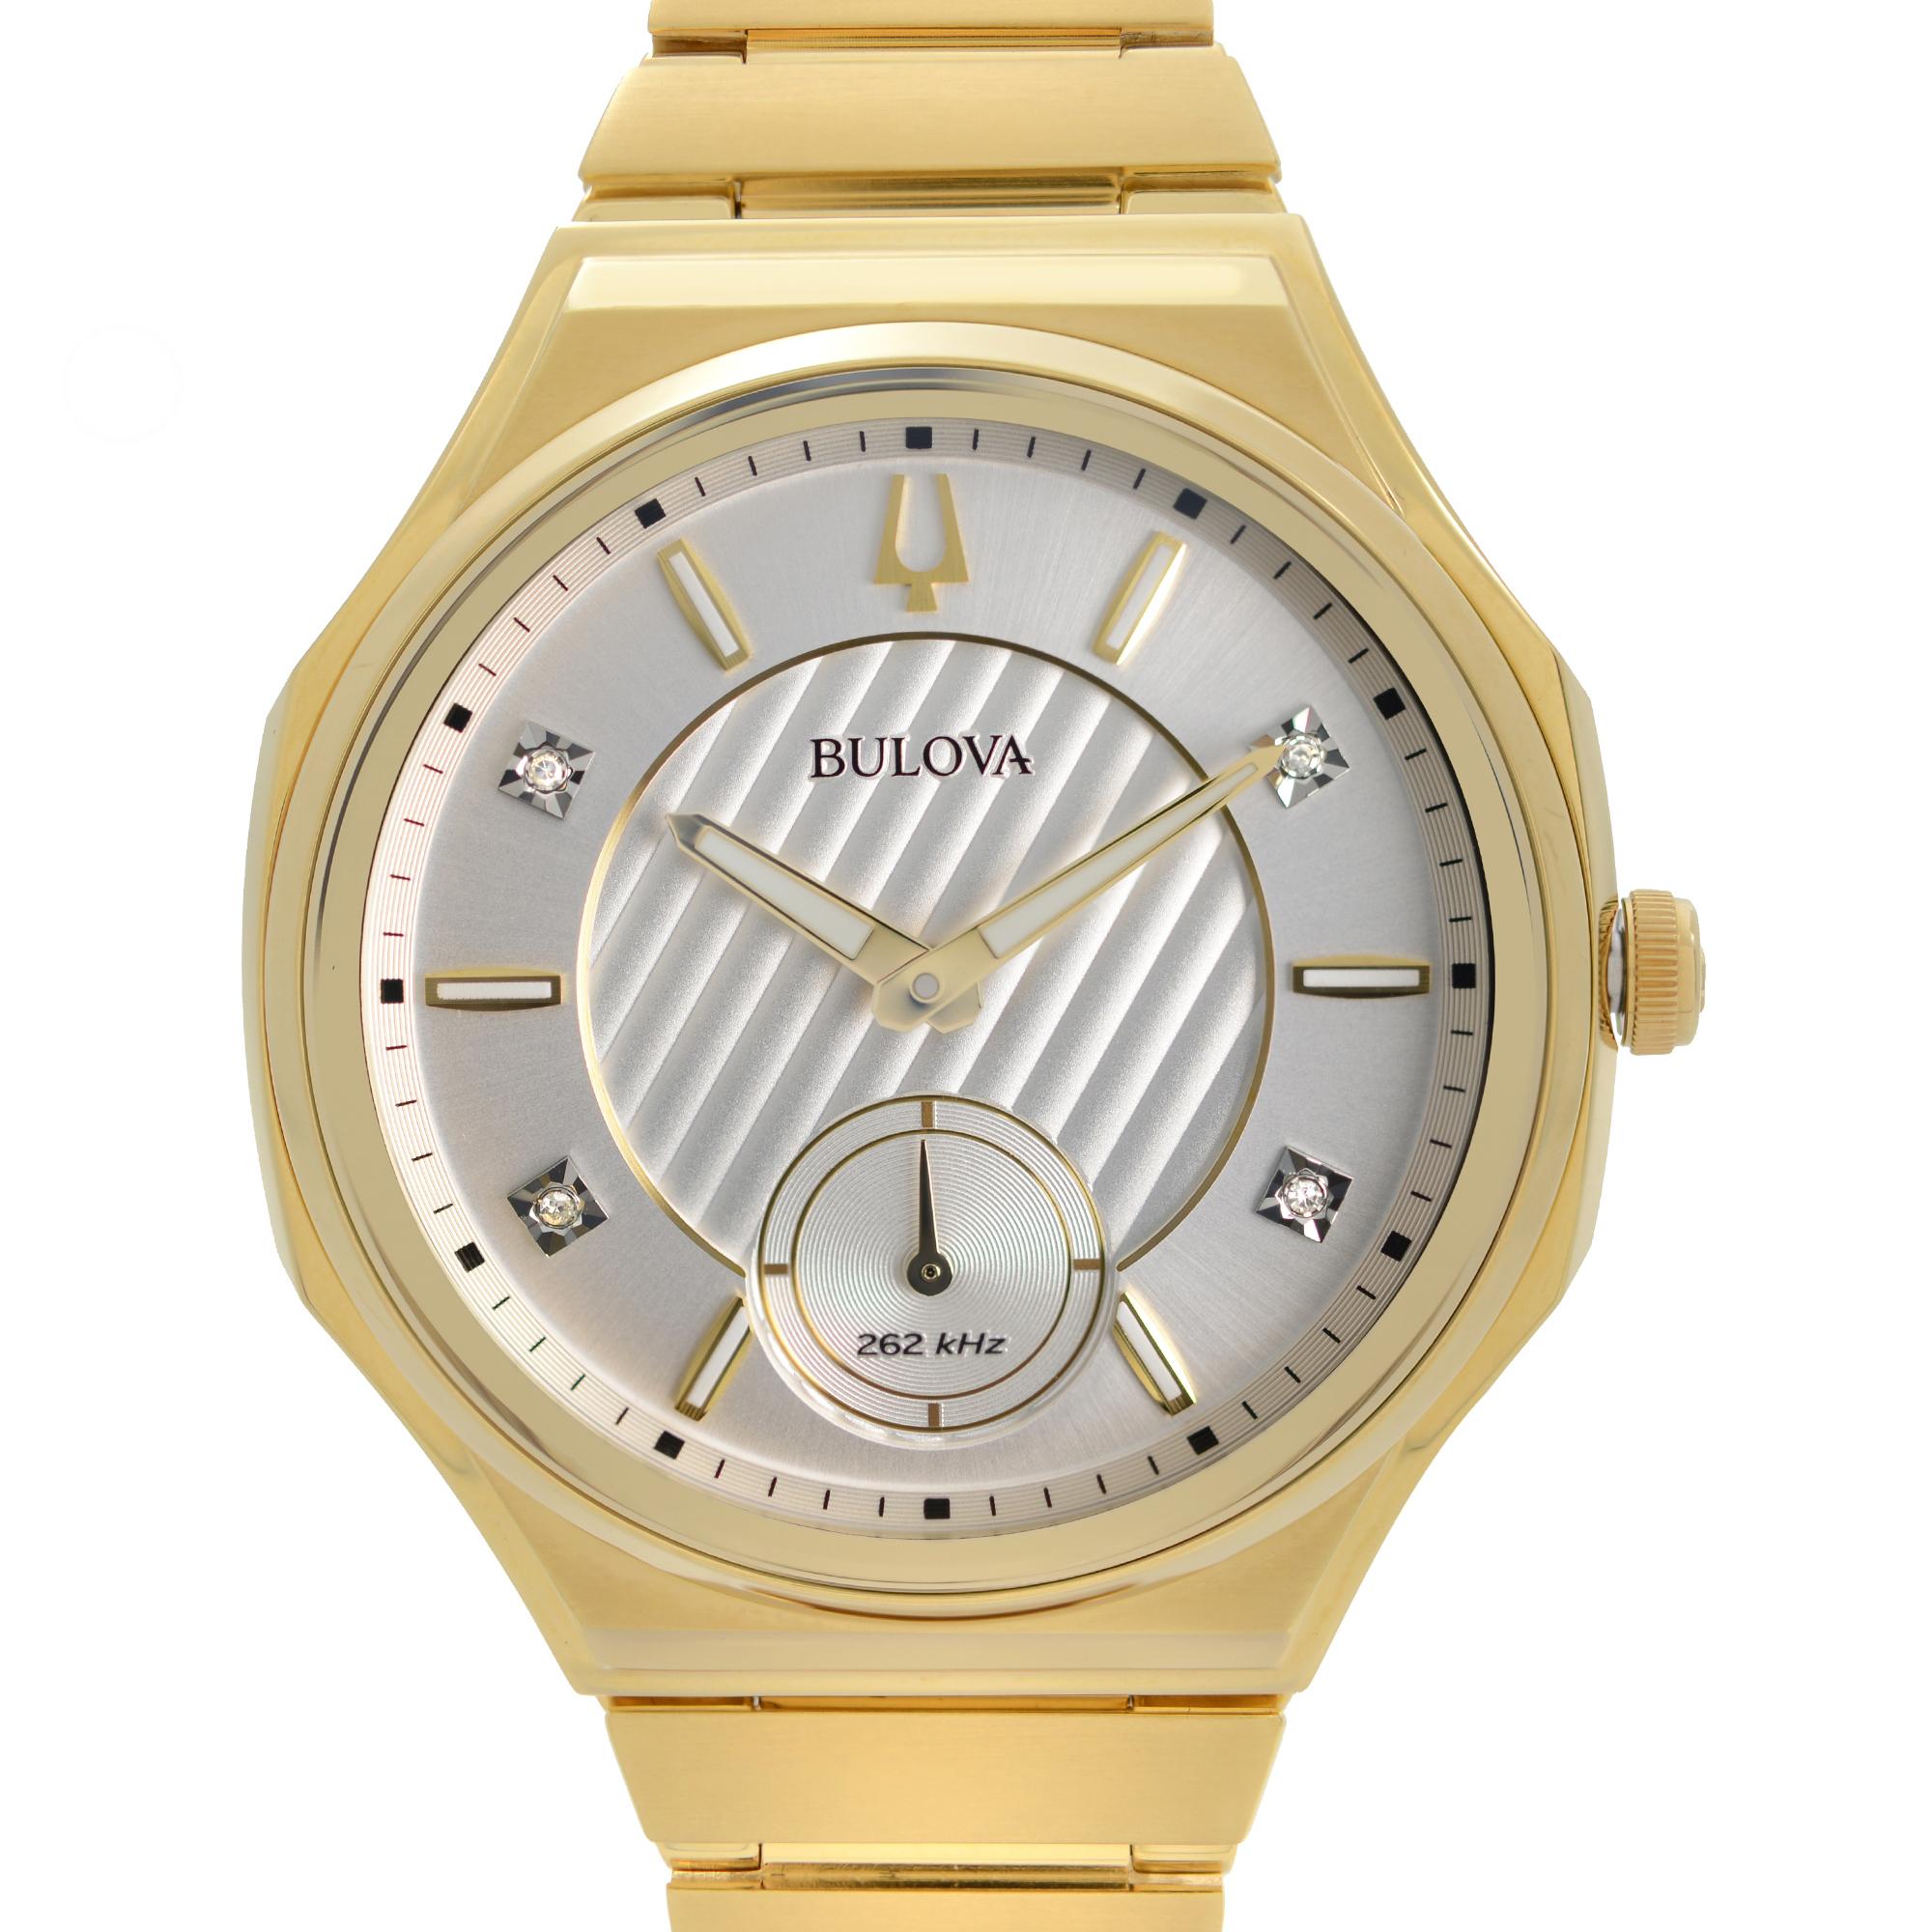 Display Model Bulova Curv Gold PVD Steel Diamond Silver Dial Quartz Ladies Watch 97P136. The Watch Has Minor Blemishes Due to Store Handling. This Beautiful Timepiece Features: Yellow Gold PVD Stainless Steel Case and Bracelet, Fixed Yellow Gold PVD